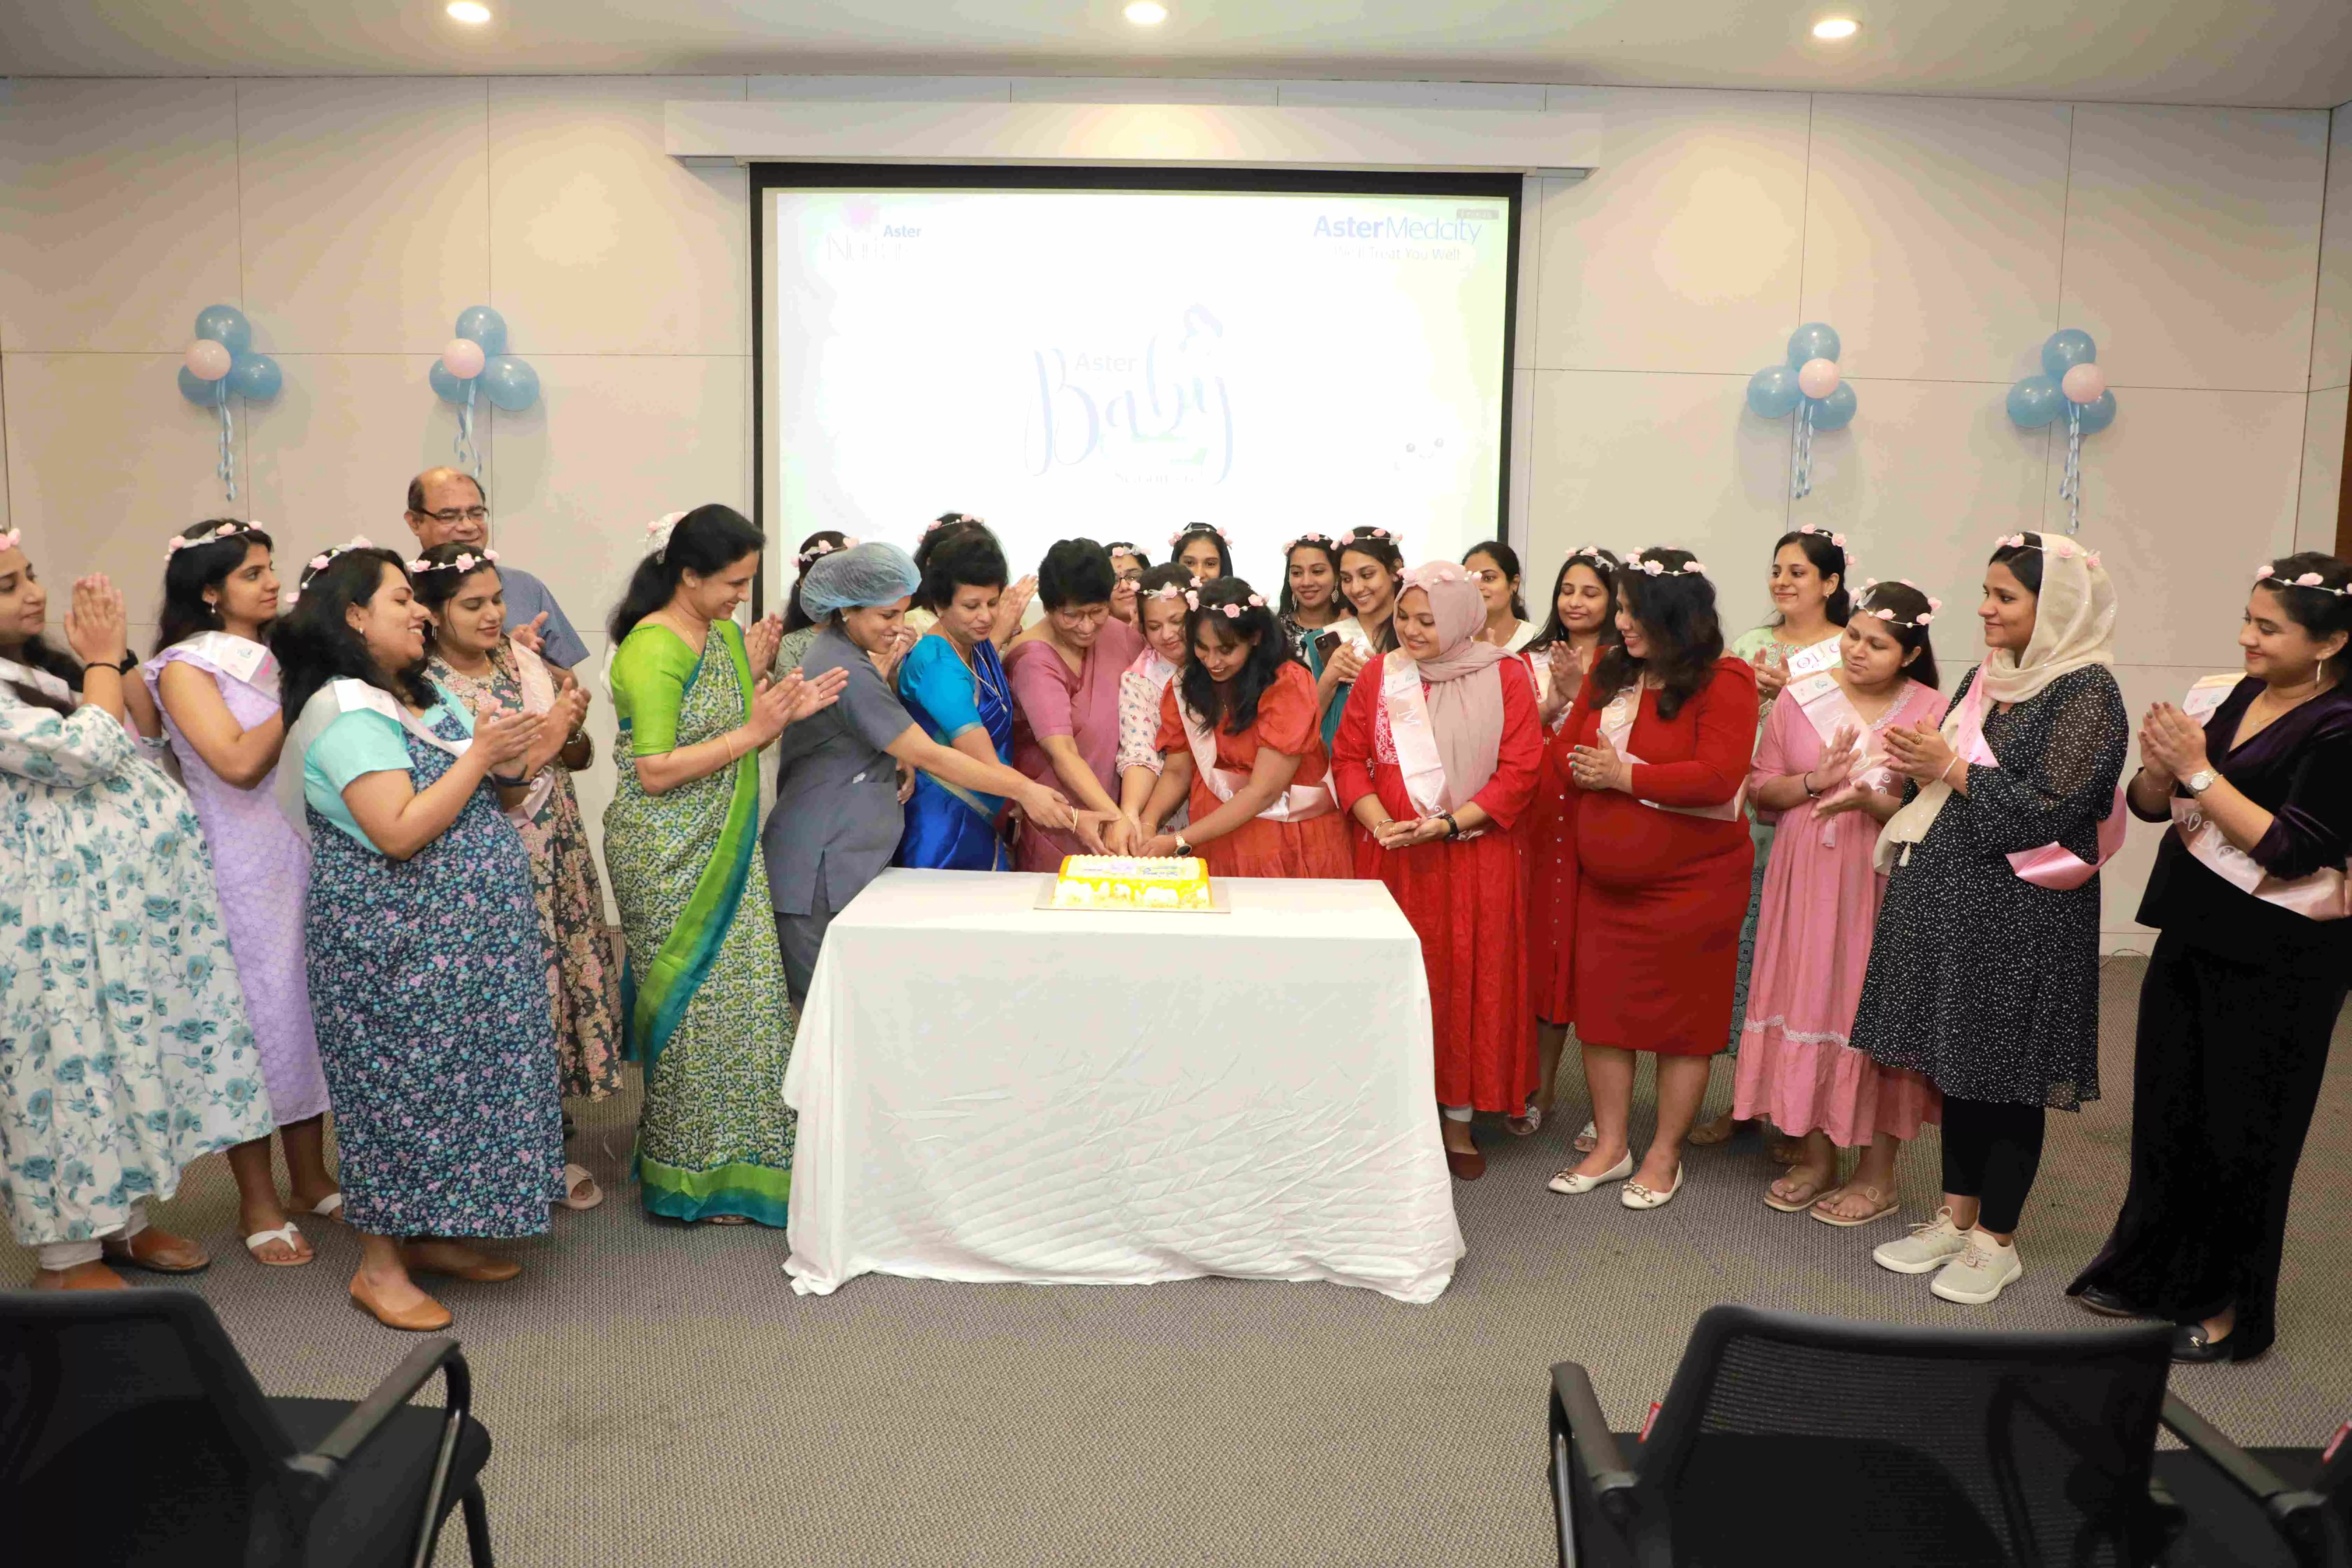 &quot;Aster Medcity's Heartfelt Celebration: Honoring Expecting Moms with a Joyous Baby Shower